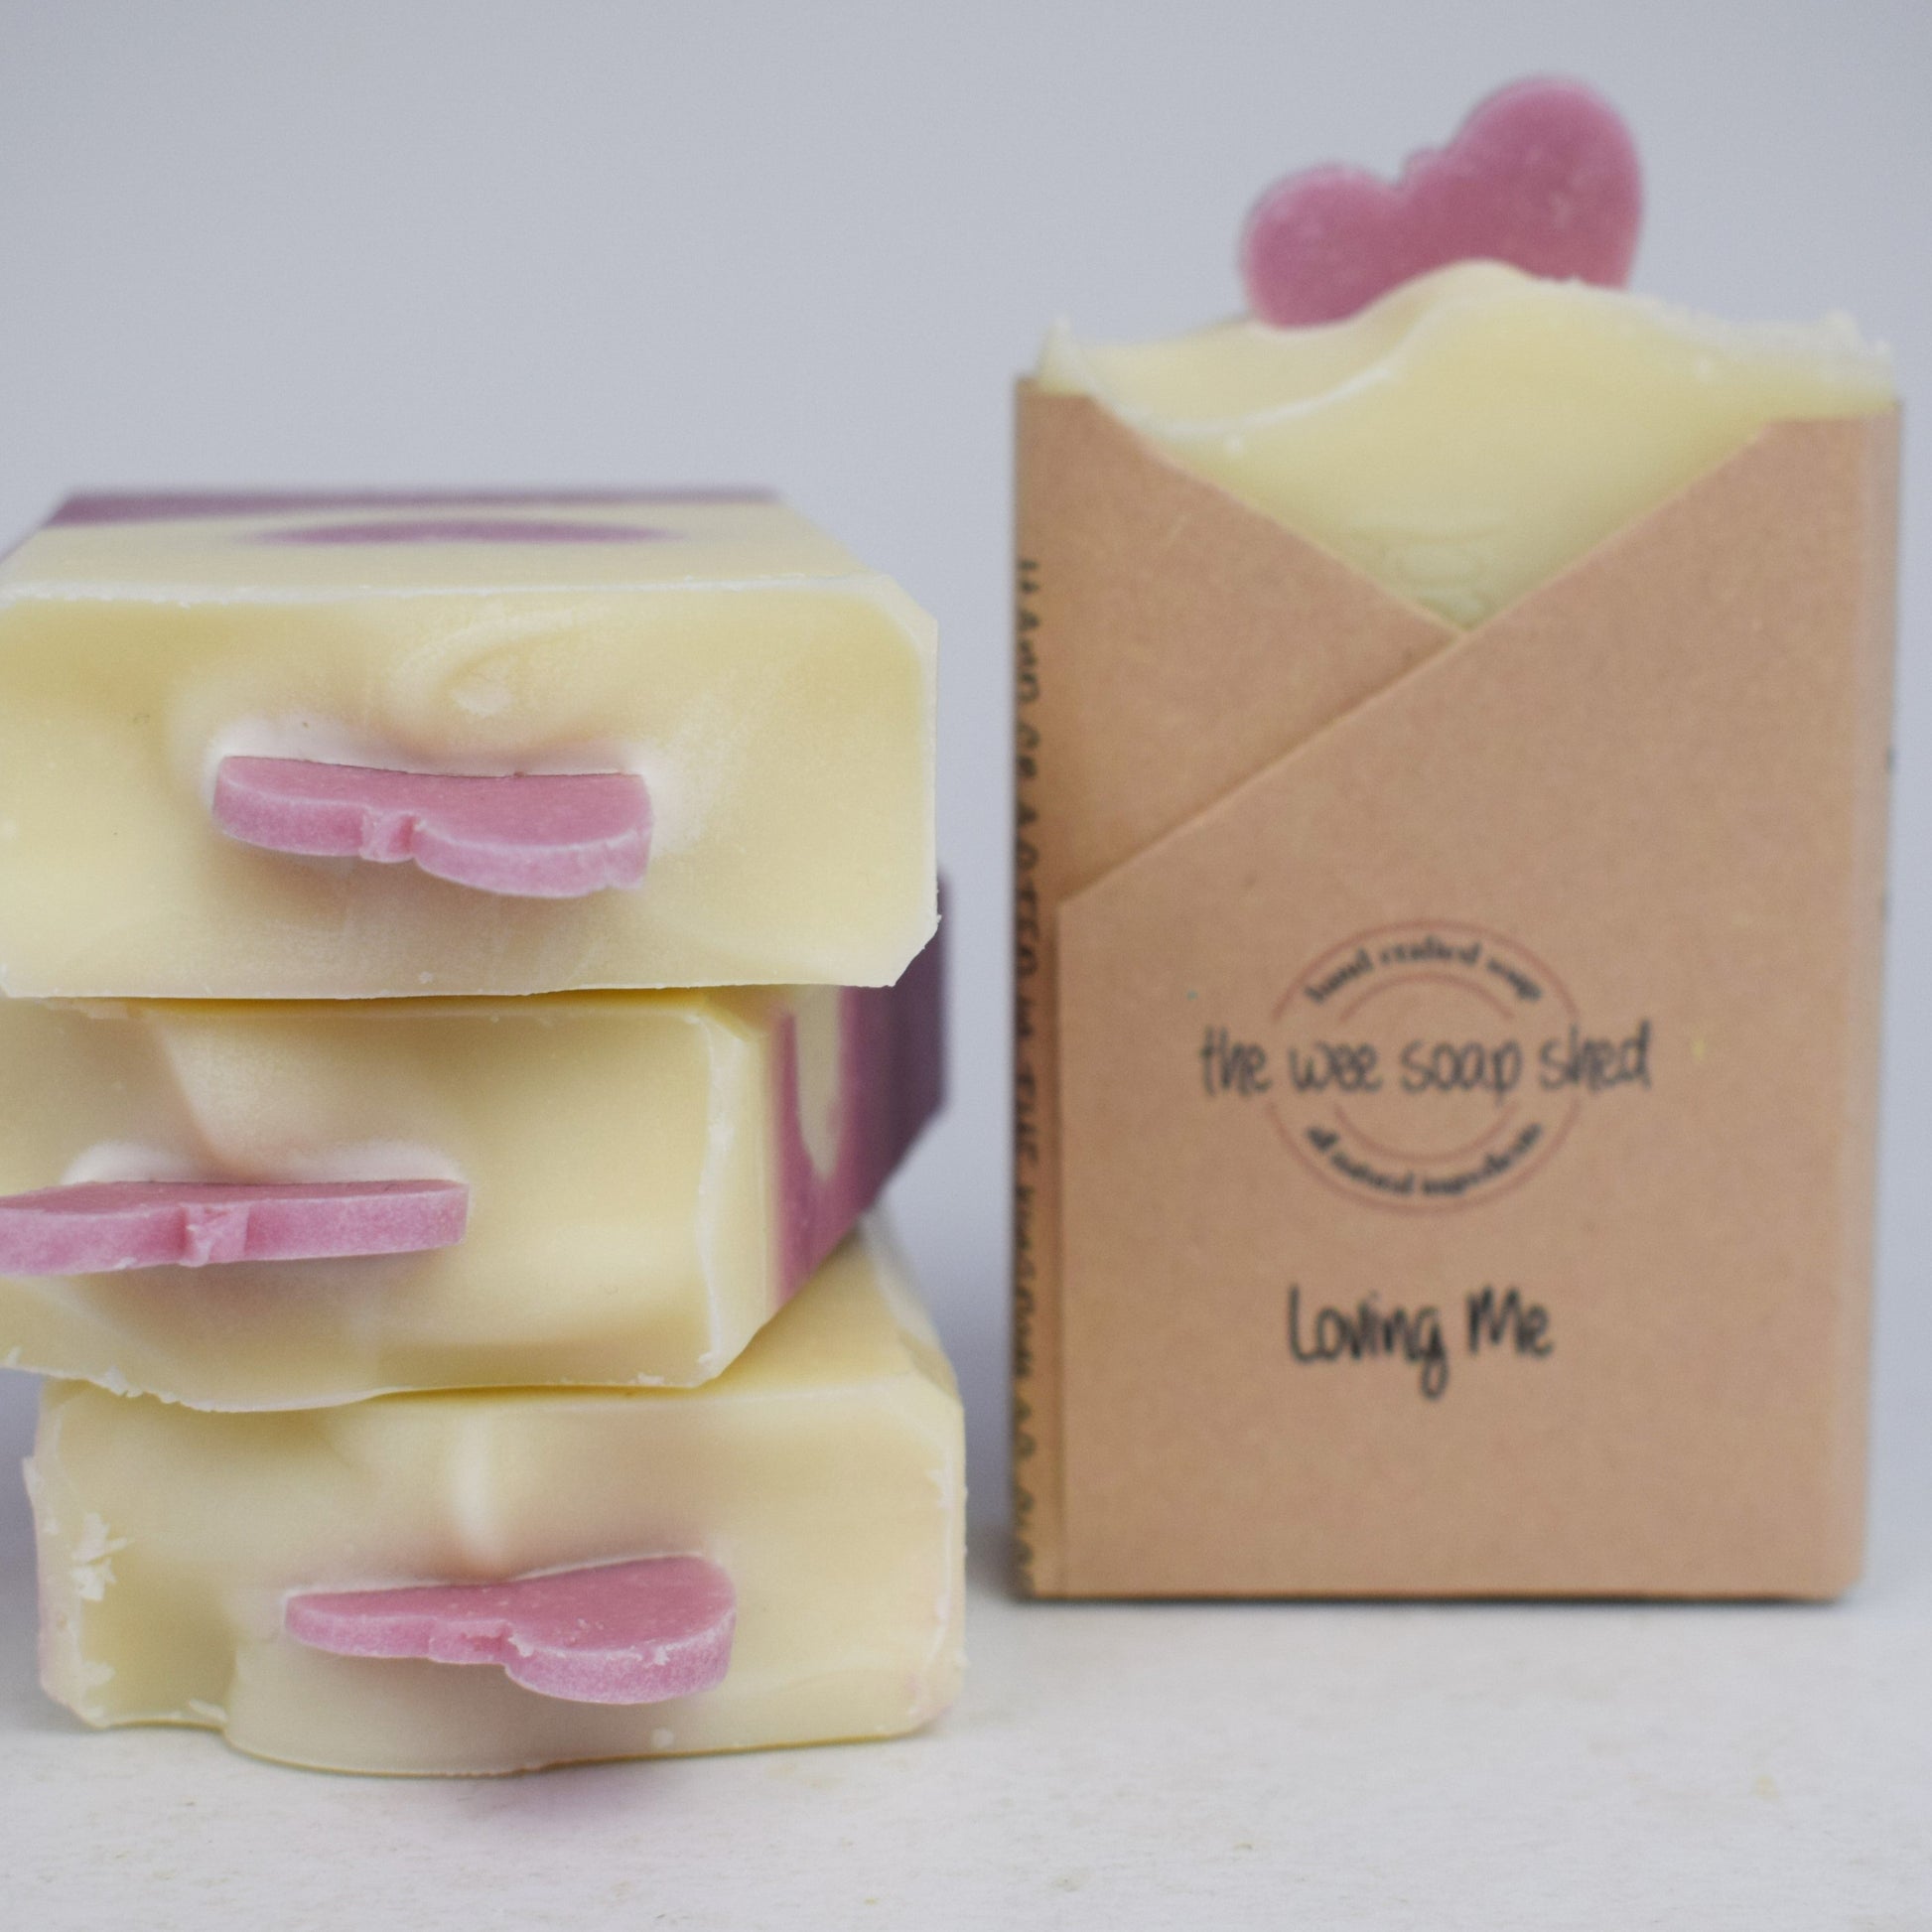 The Wee Soap Shed - Loving Me.  Our special edition Valentine soap scented with bergamot & pink grapefruit essential oils.